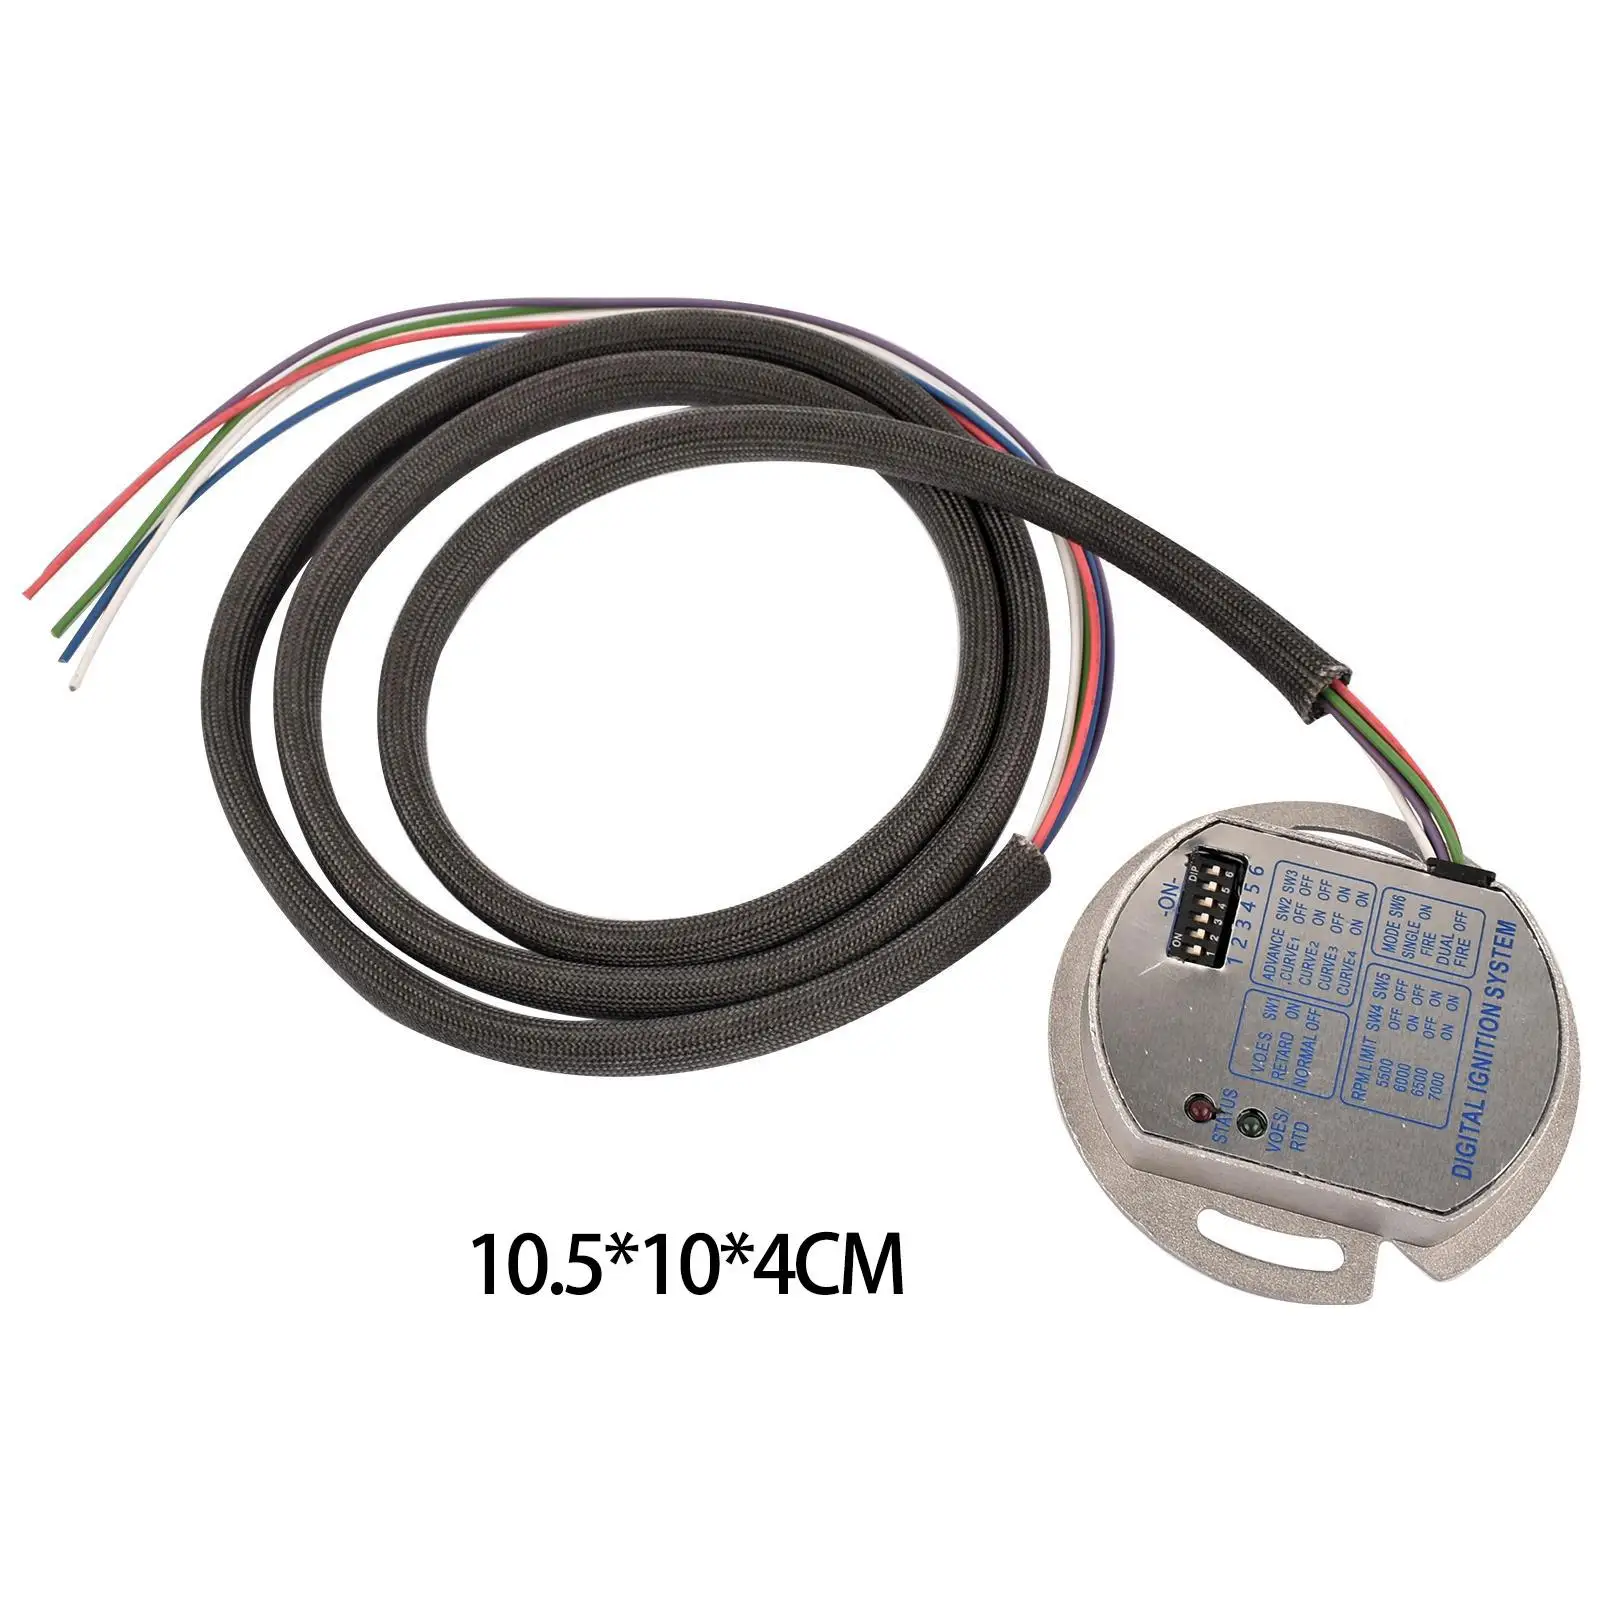 Programmable Single Fire Electronic Ignition Module 53-644 Digital Ignition Module for Harley-Davidson Professional Parts